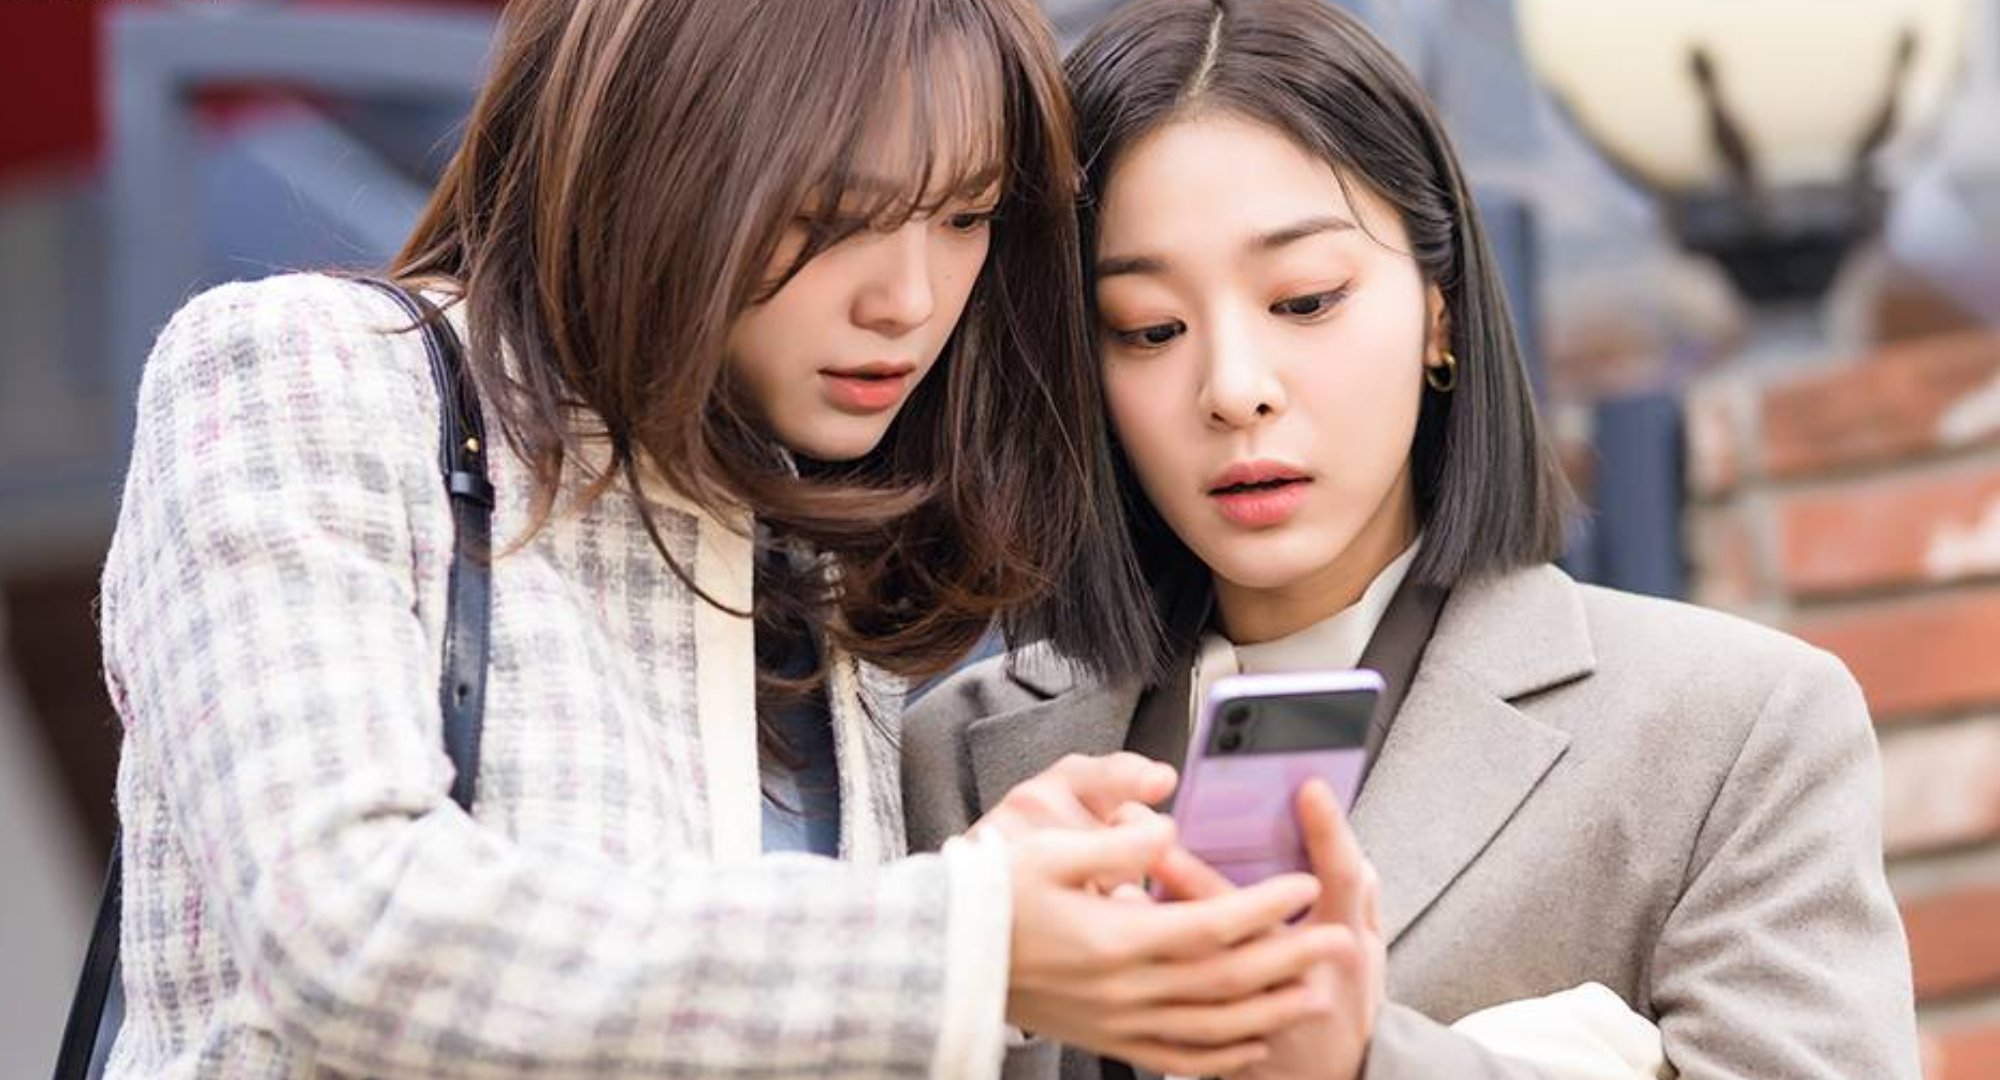 Kim Se-jeong and Seol In-ah as their best friend characters in 'Business Proposal' K-drama.